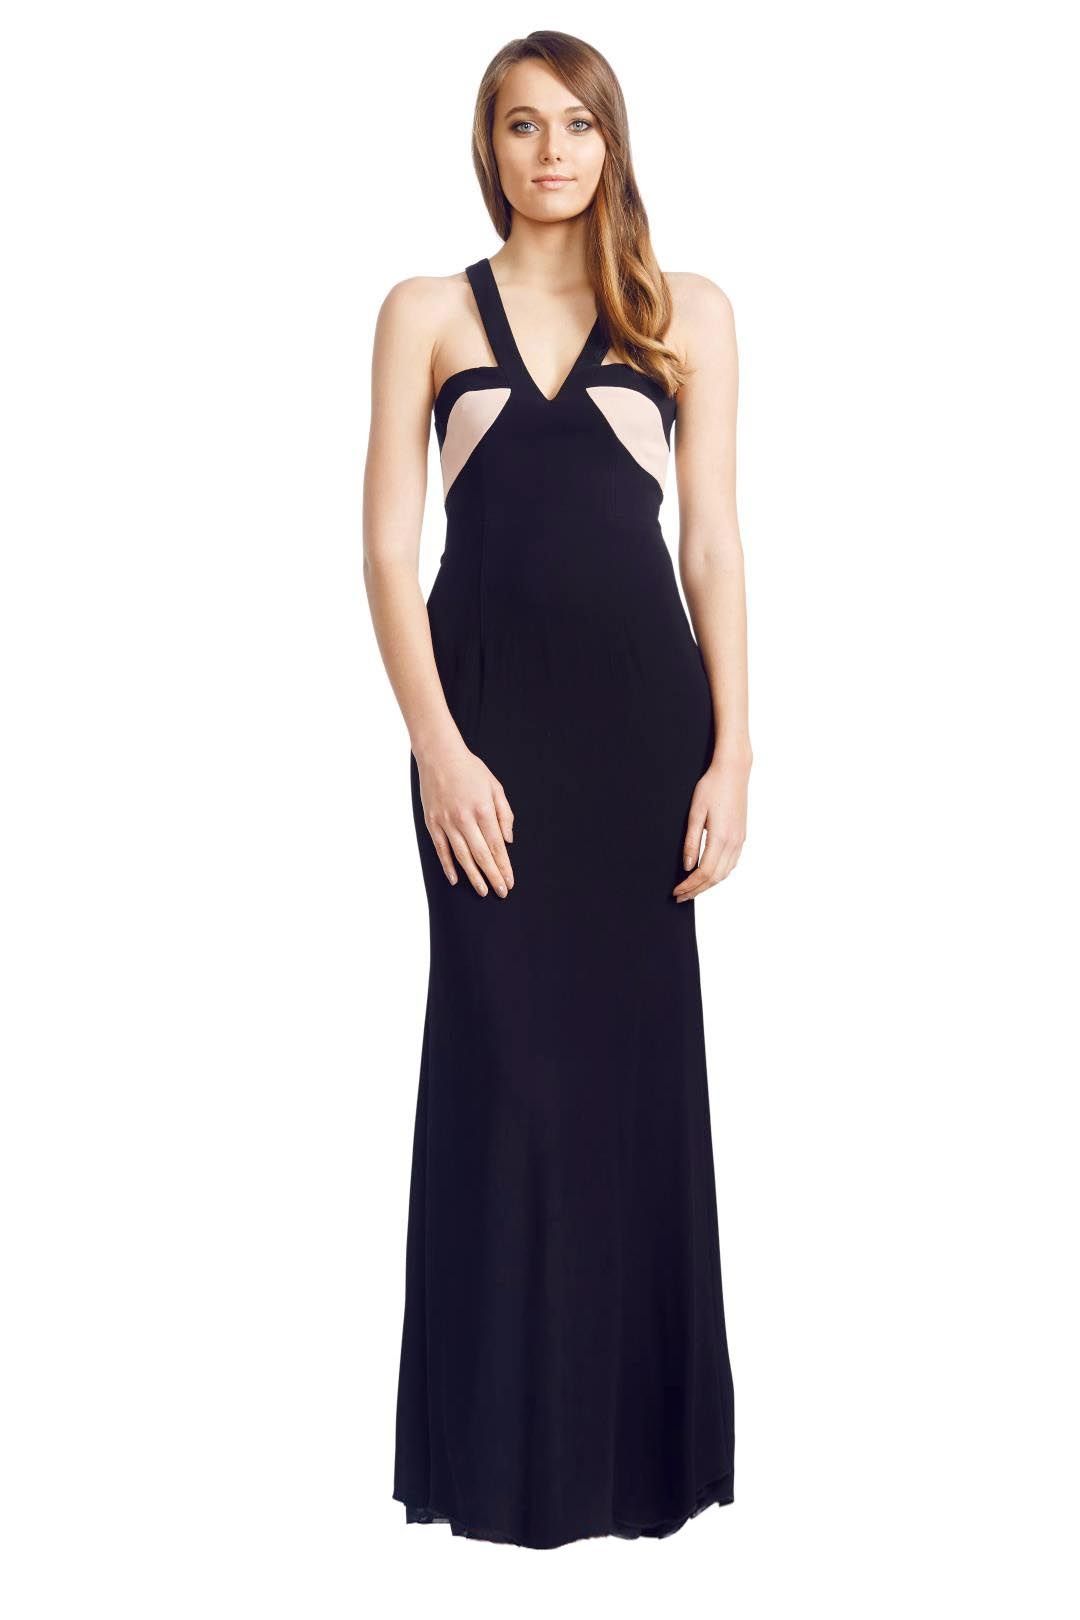 Alex Perry - Illana Gown - Black - Front